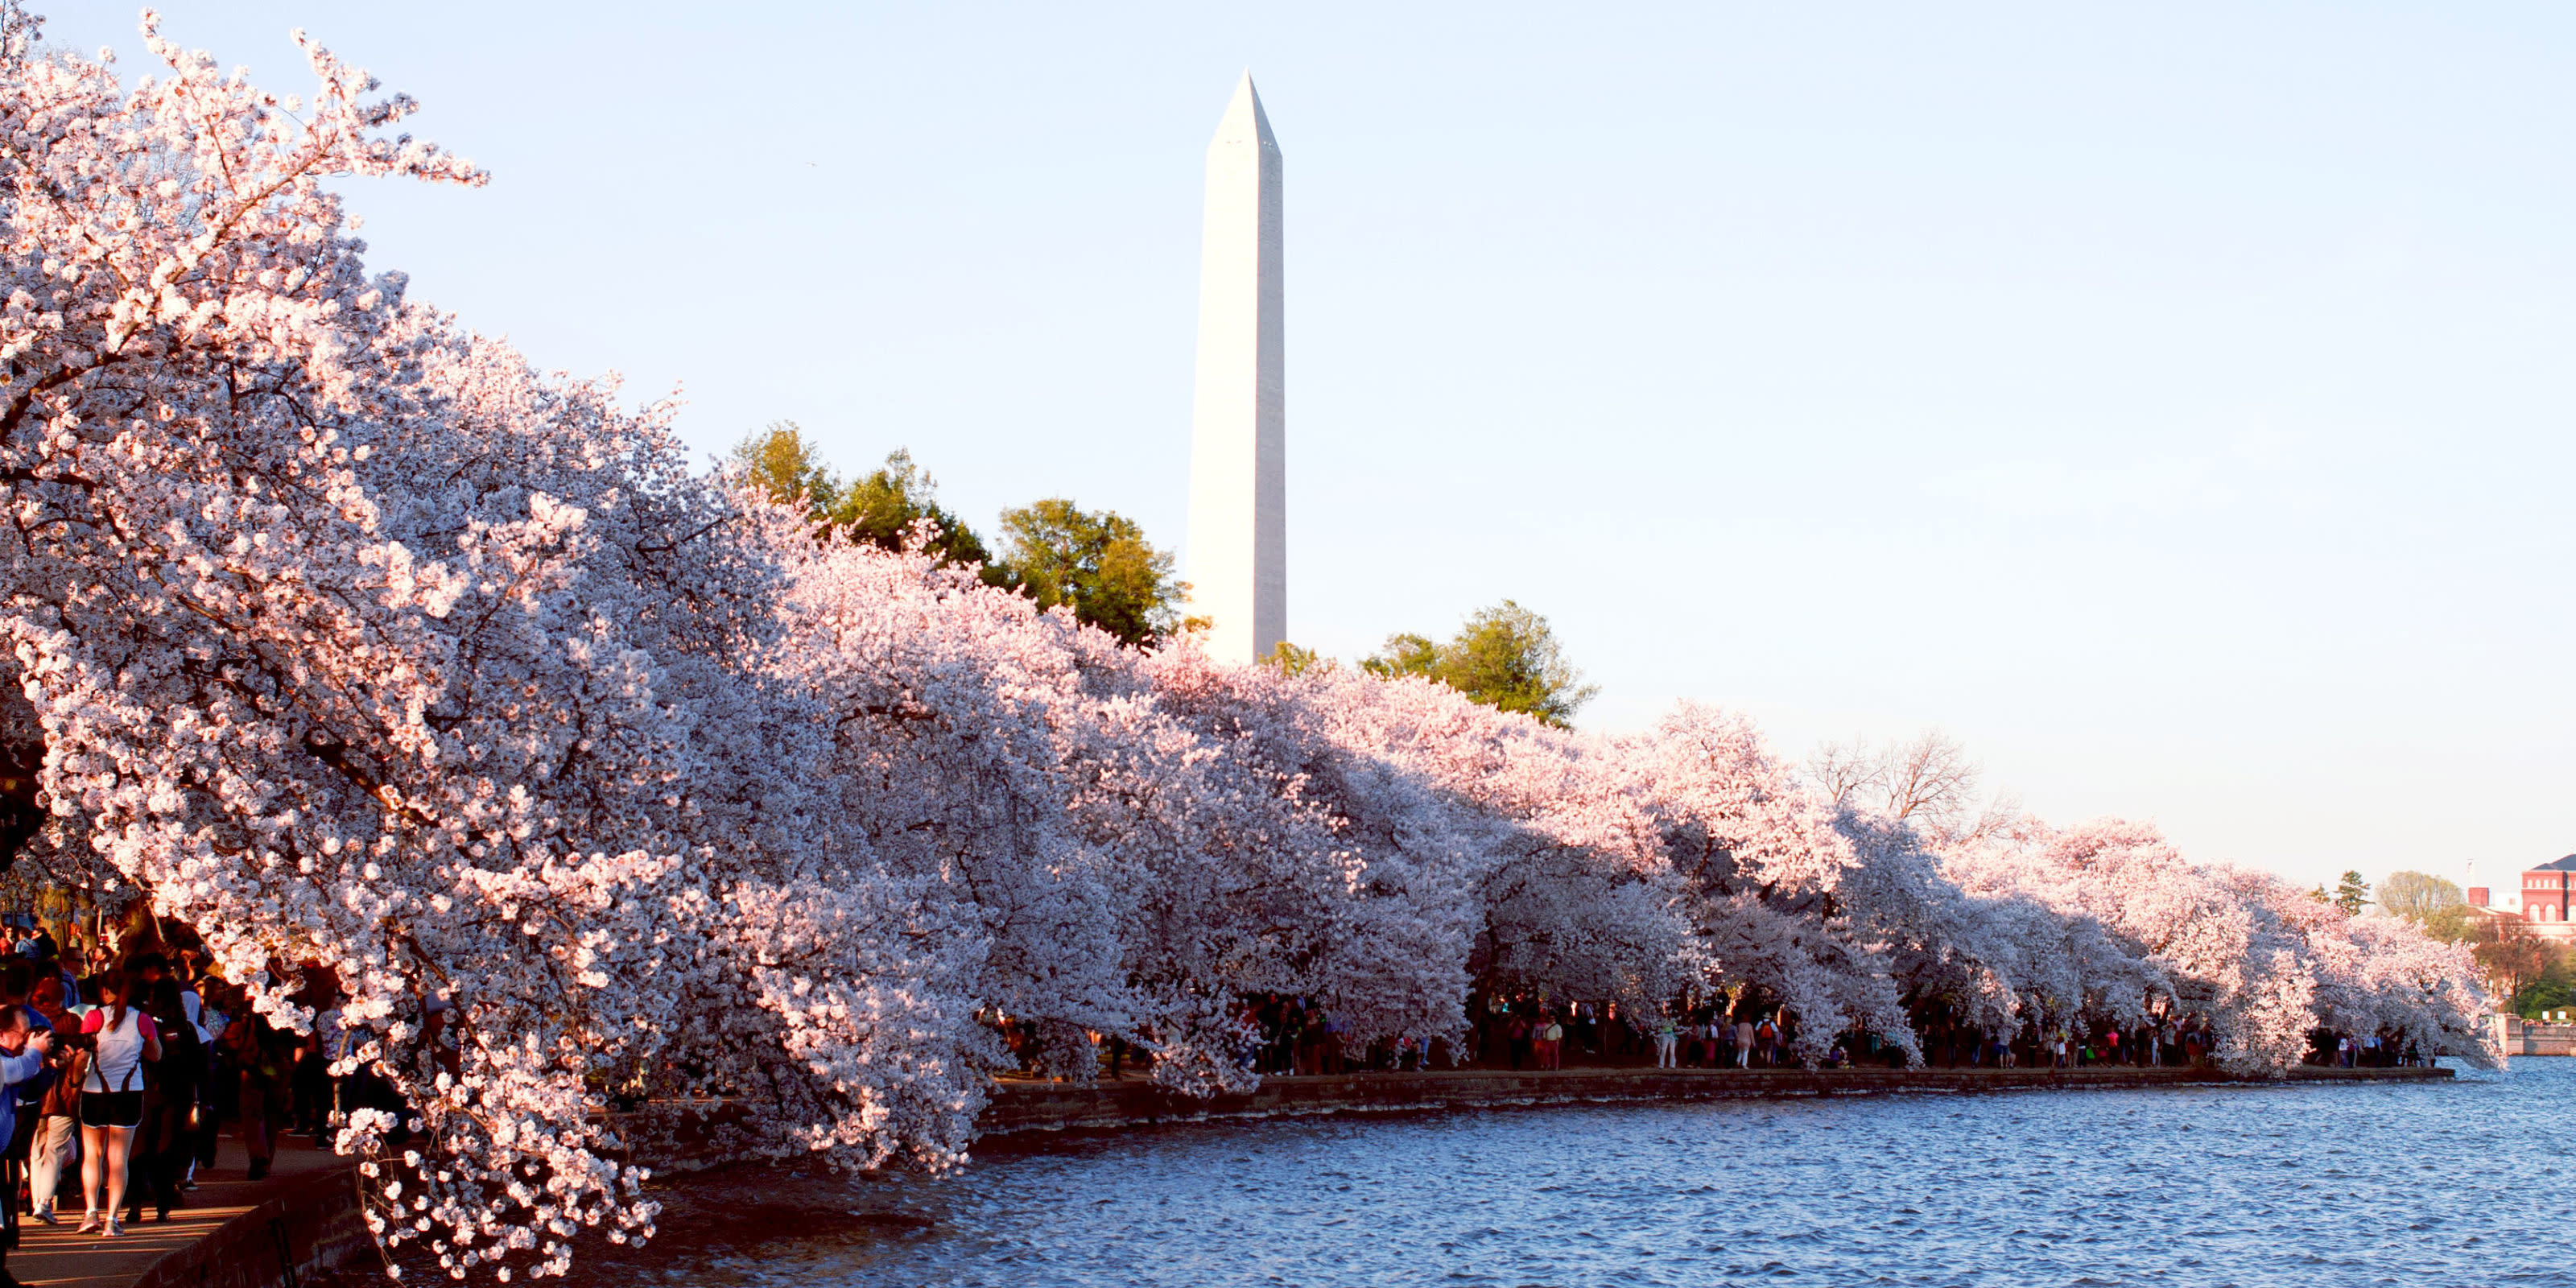 Washington, DC's Cherry Blossom Trees are Blooming Weeks Earlier Than Usual